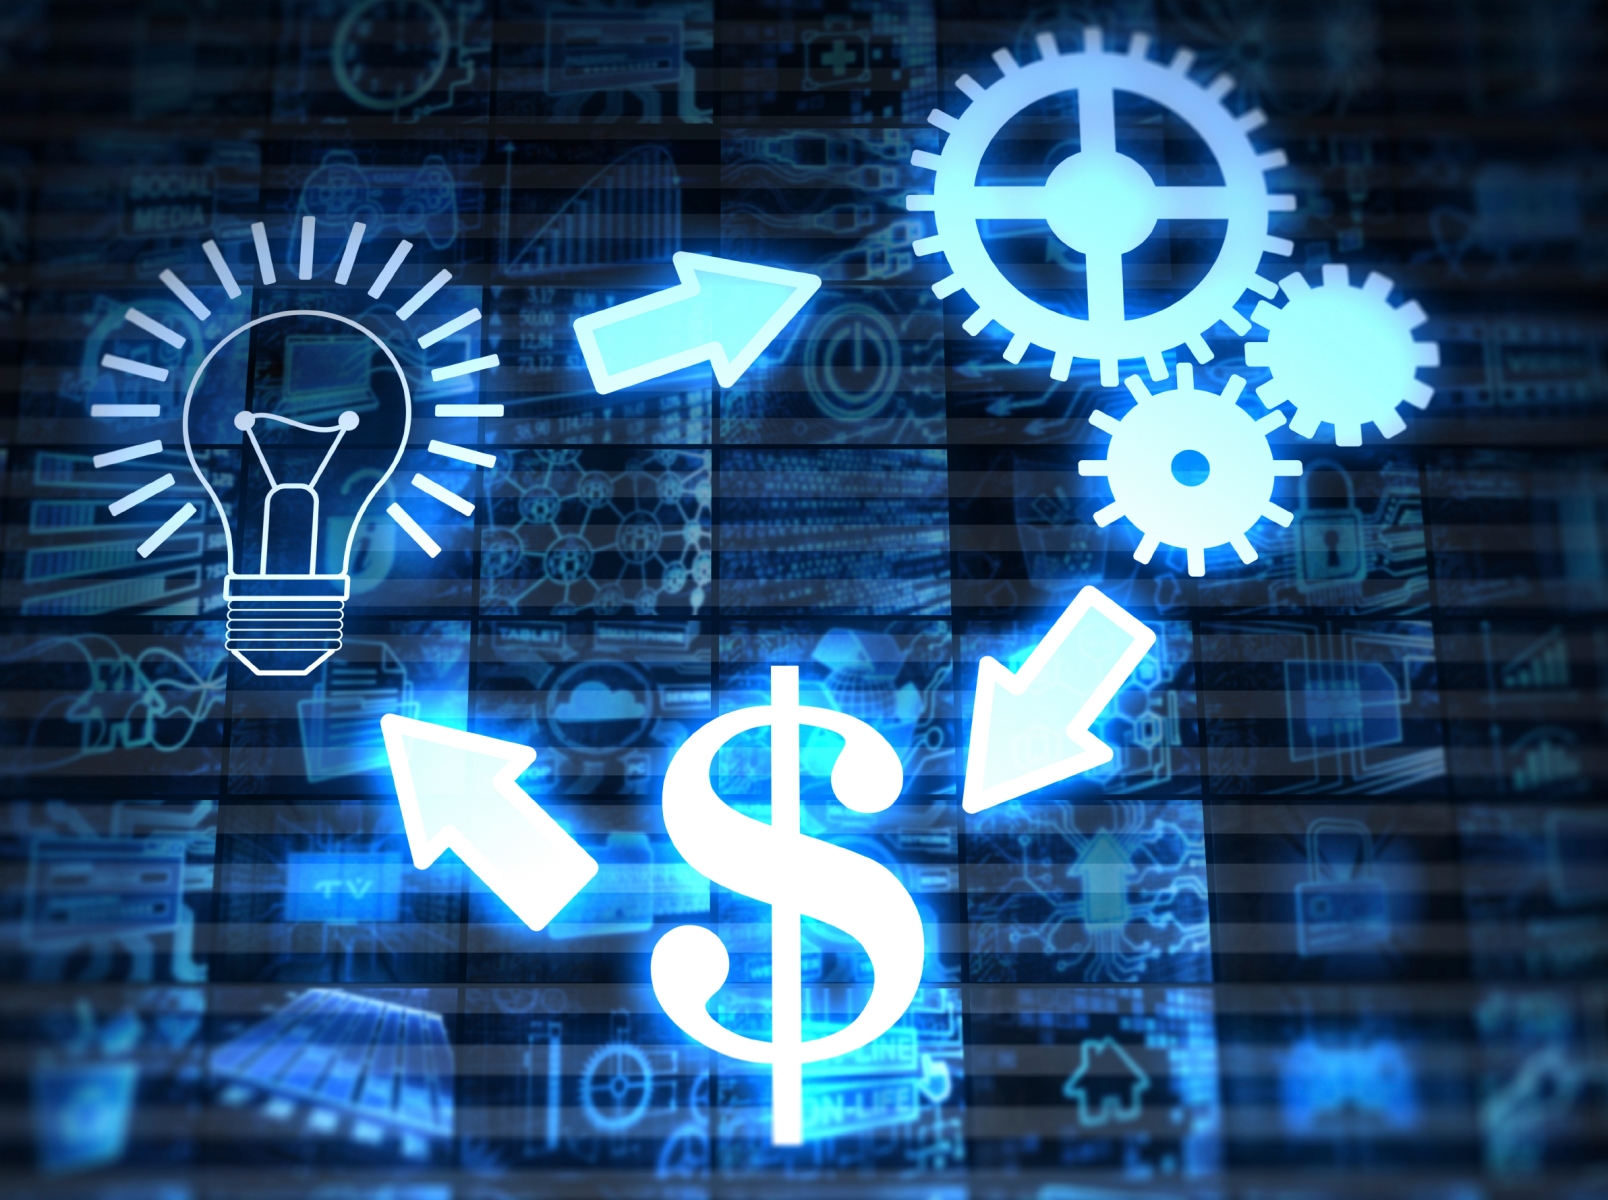 Conceptual representation of innovation and finance, with a lightbulb symbolizing ideas, gears for processes or mechanics, and a dollar sign indicating economic or monetary aspects, all interconnected with arrows, suggesting the dynamic relationship between creativity, operational execution, and financial success.